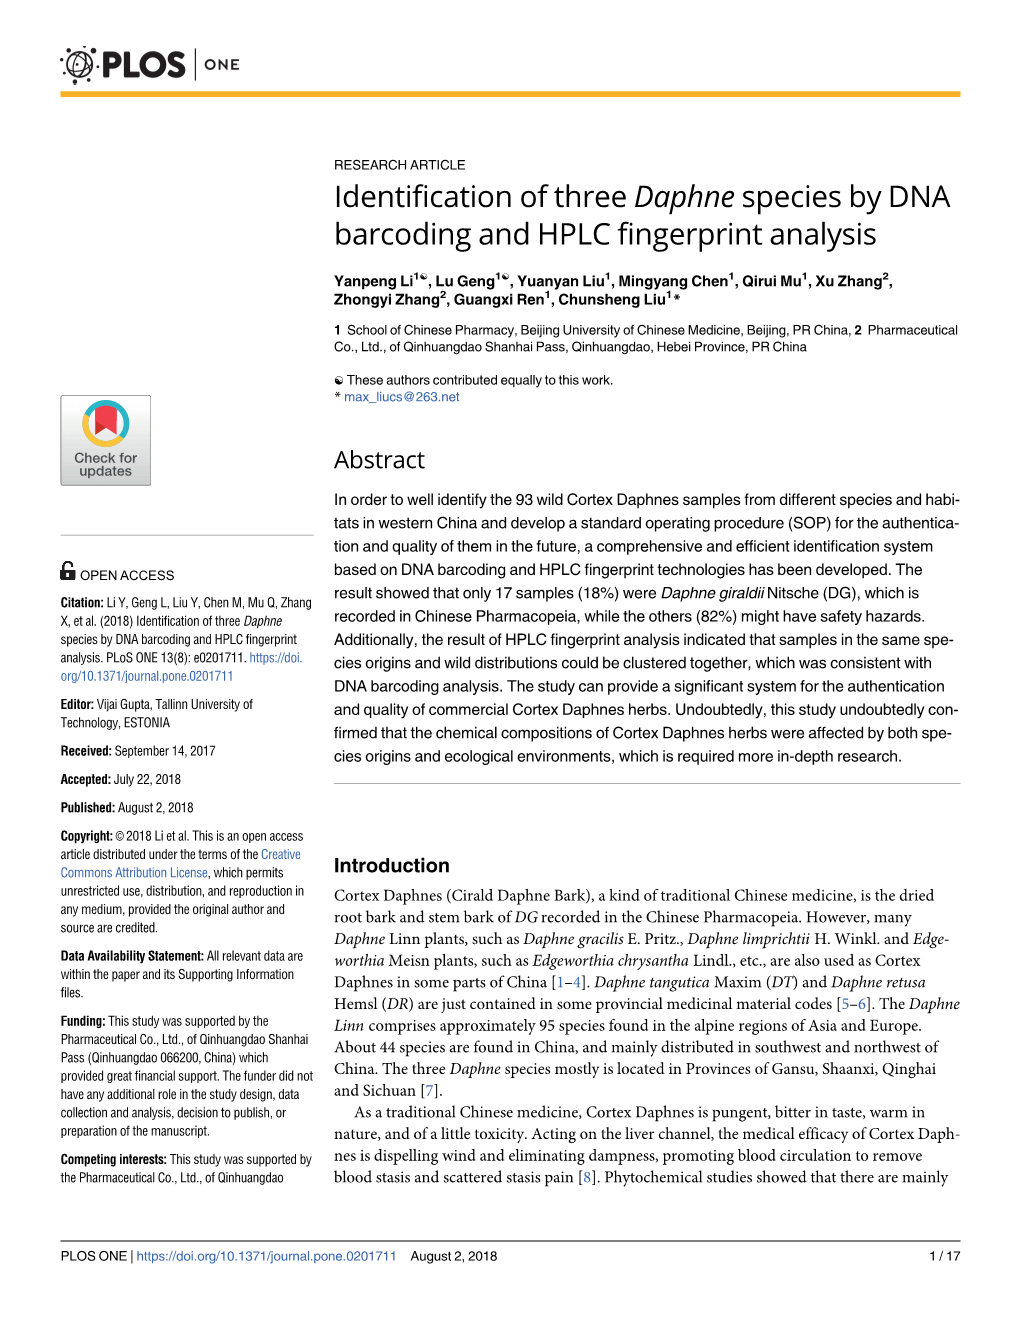 Identification of Three Daphne Species by DNA Barcoding and HPLC Fingerprint Analysis